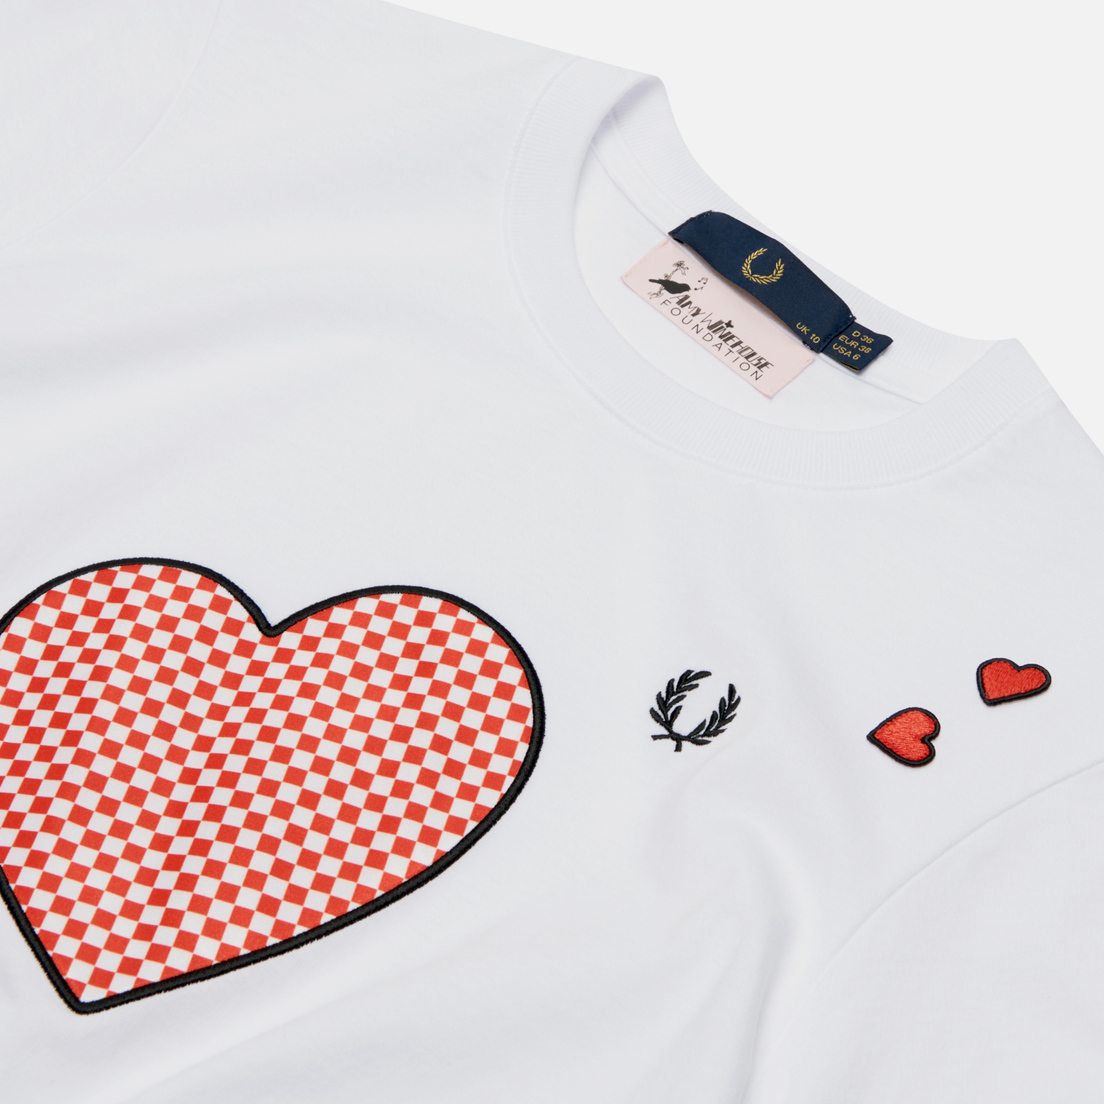 Fred Perry Женская футболка x Amy Winehouse Printed